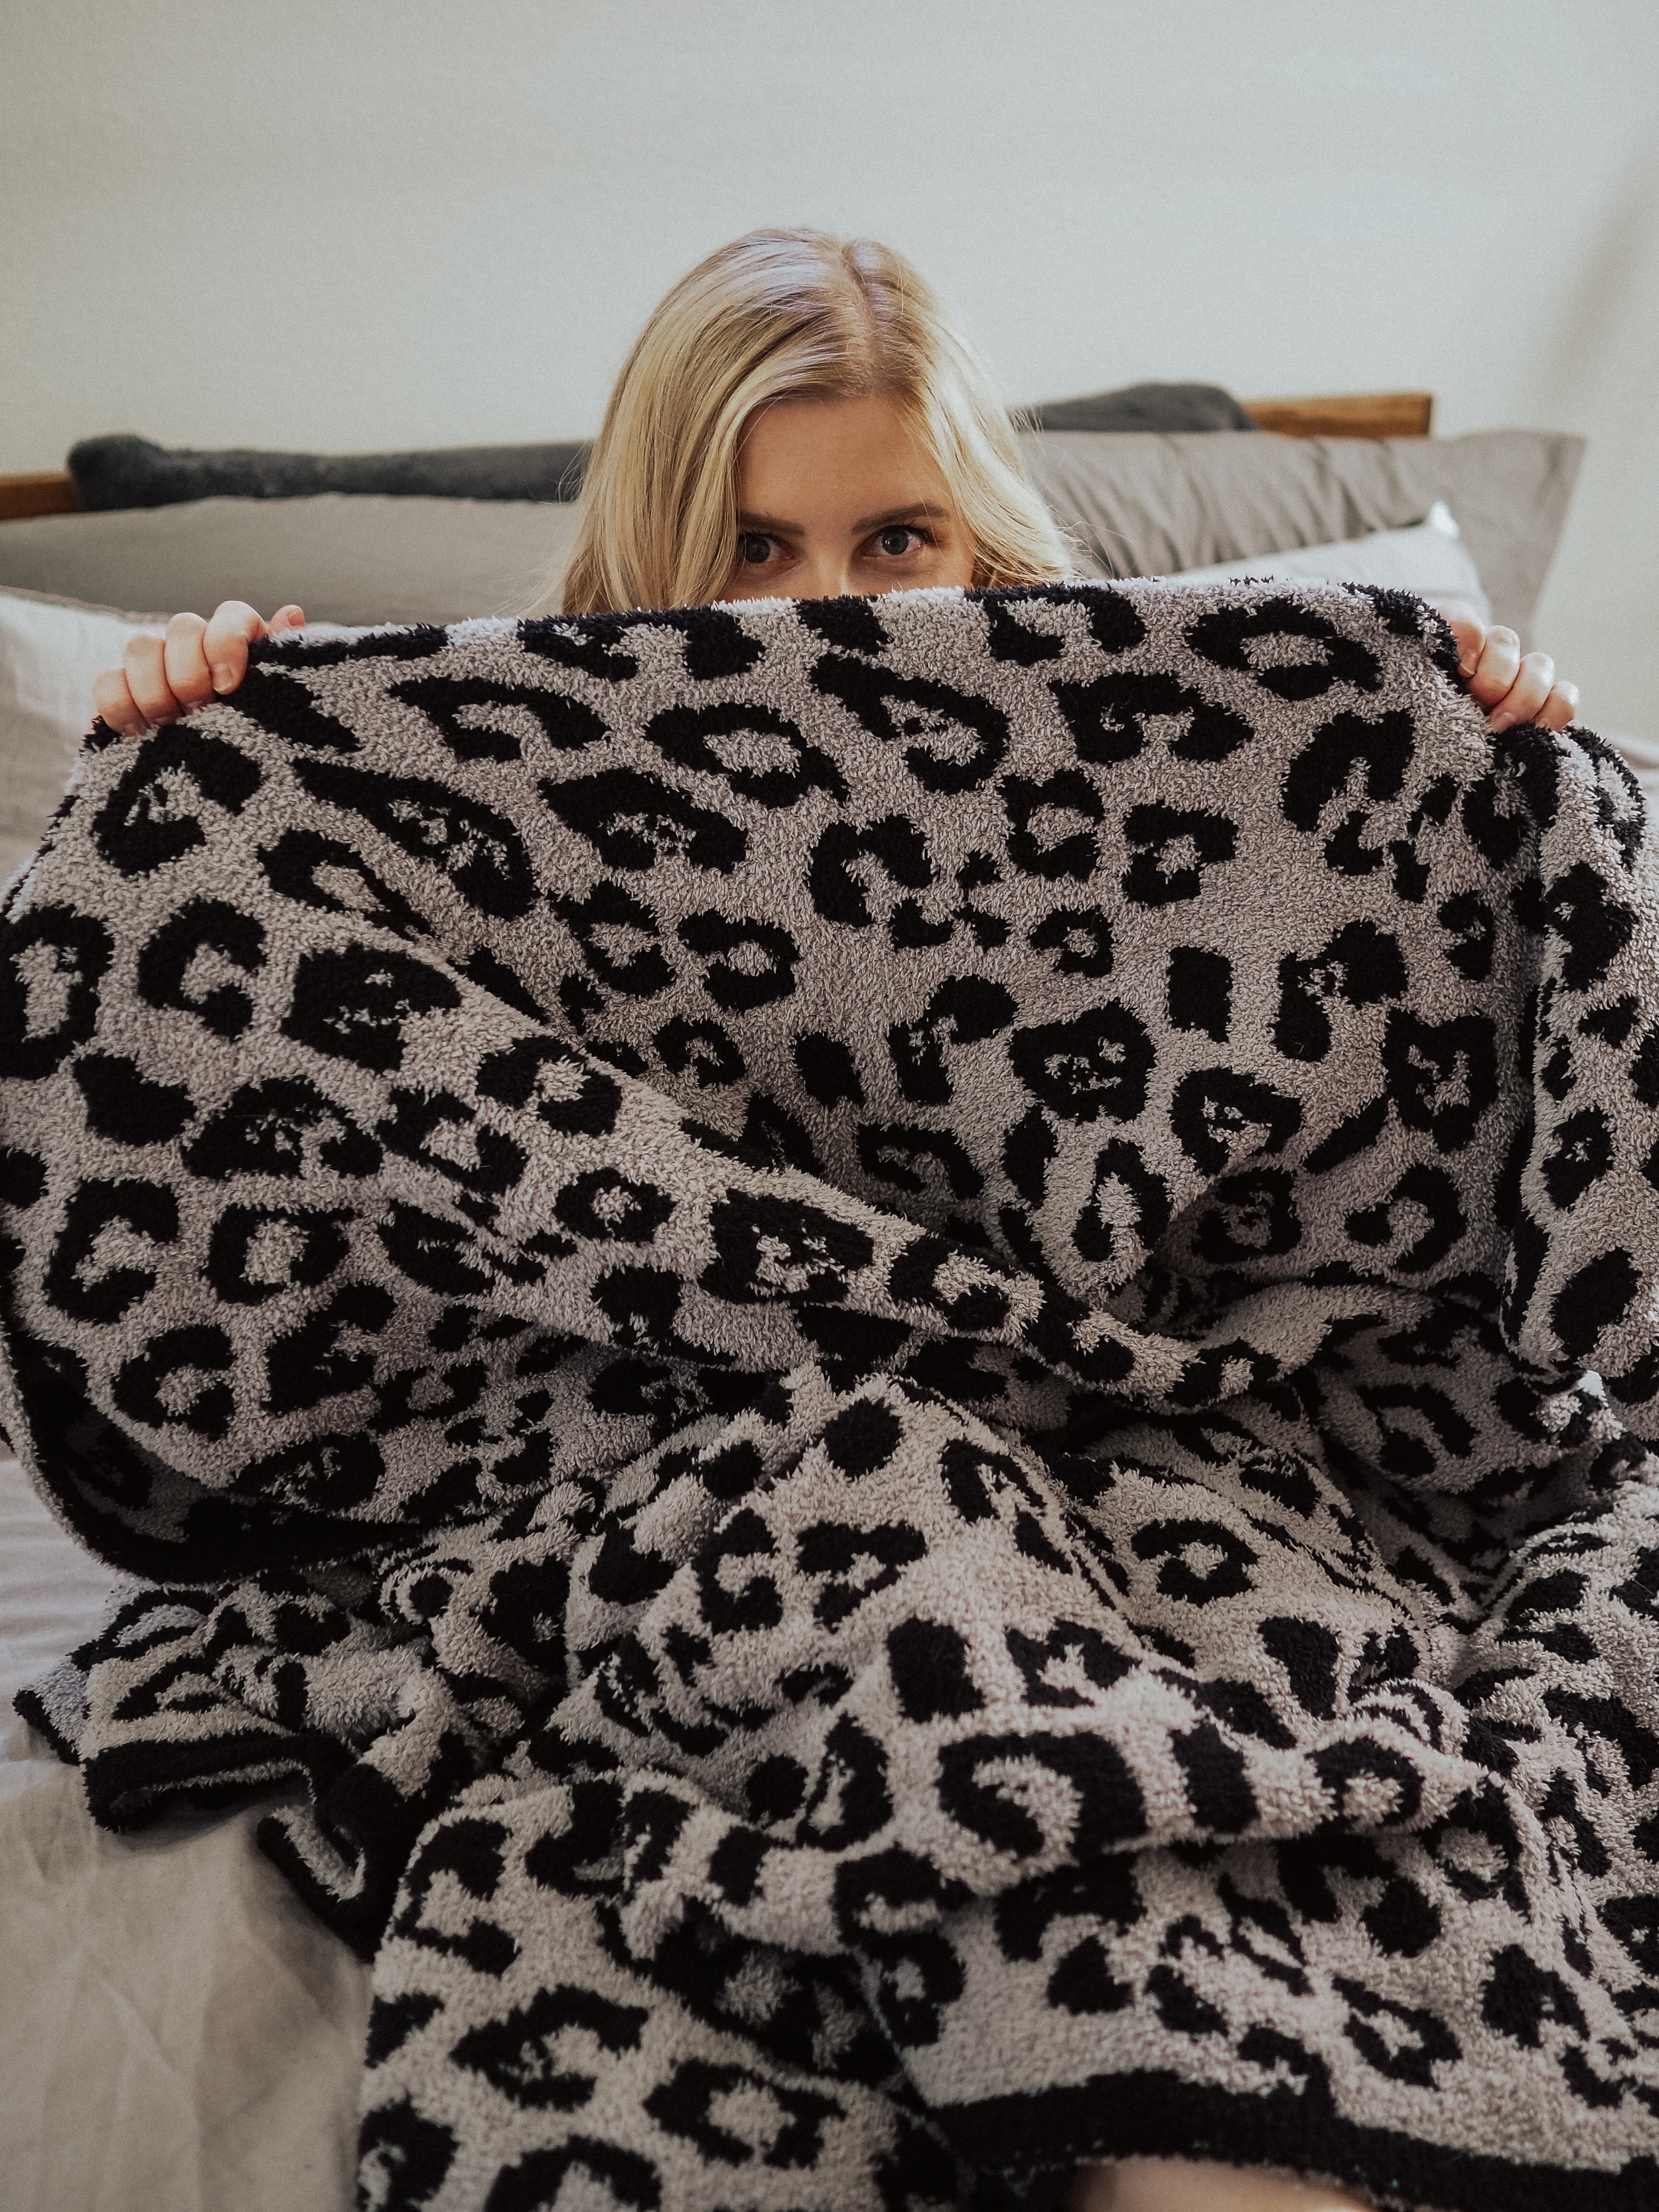 Barefoot Dreams blankets are expensive! So - are they actually worth it? Kelsey of Blondes & Bagels reviews Barefoot Dreams blankets.